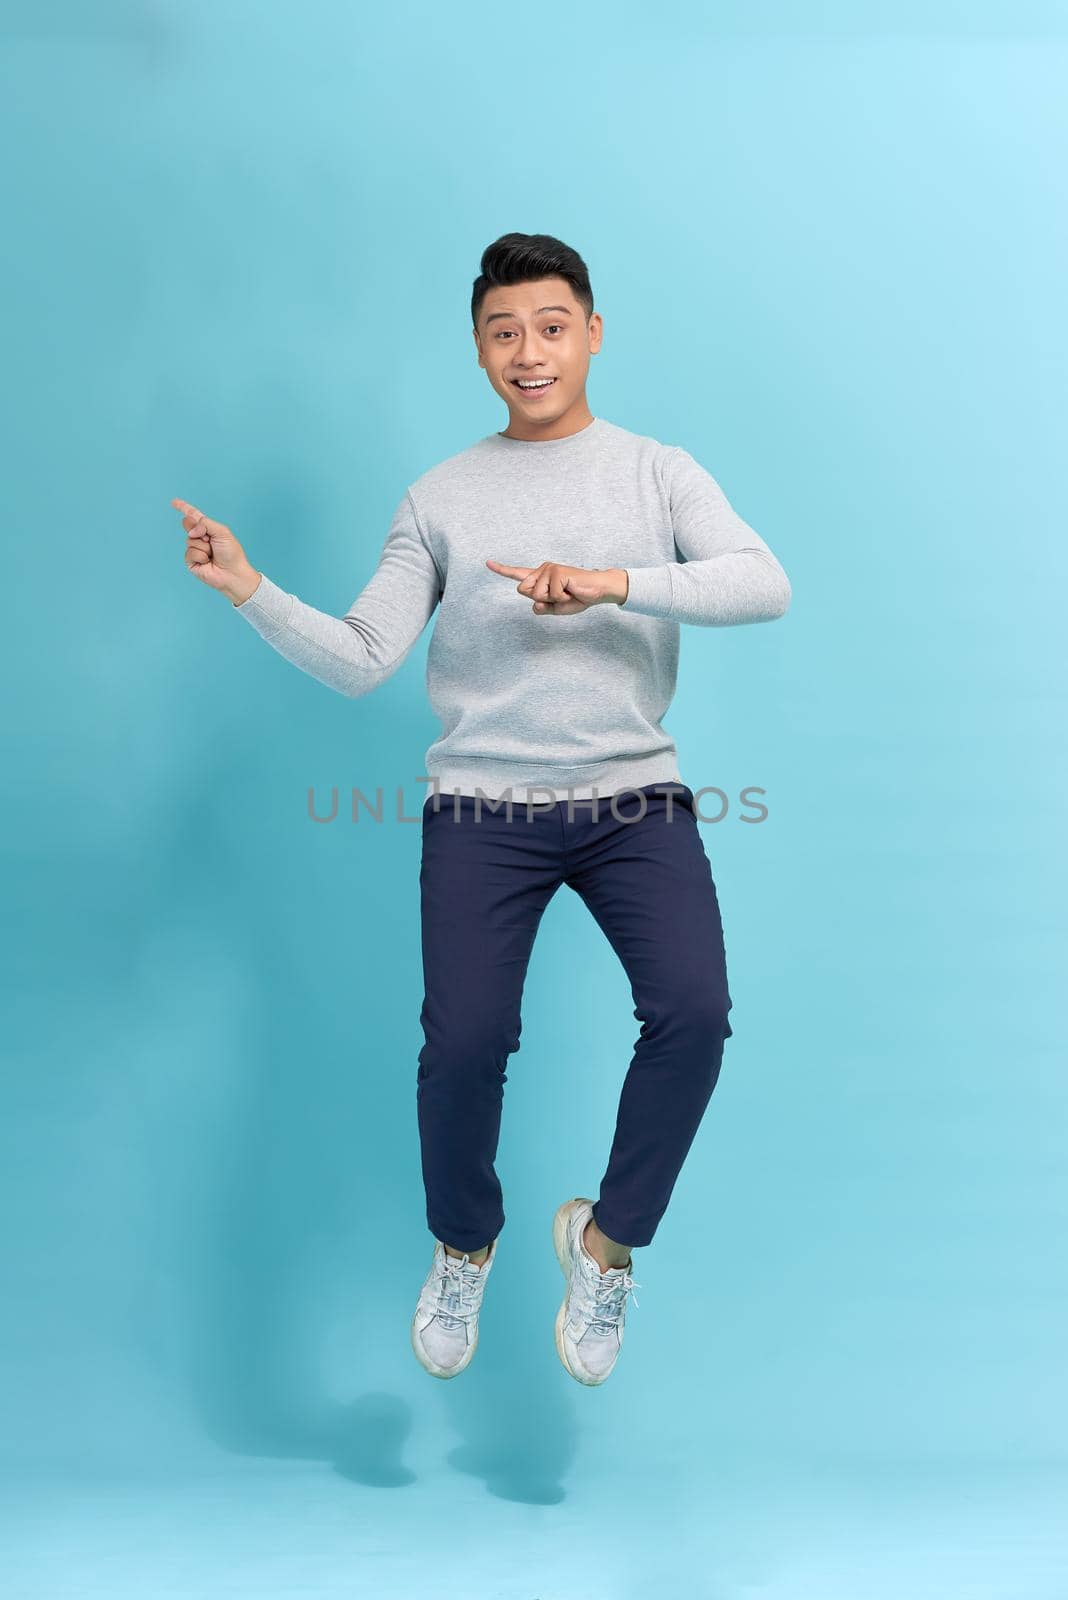 Happy, young, funny, attractive handsome man jumping in air and pointing index fingers to the side over blue background